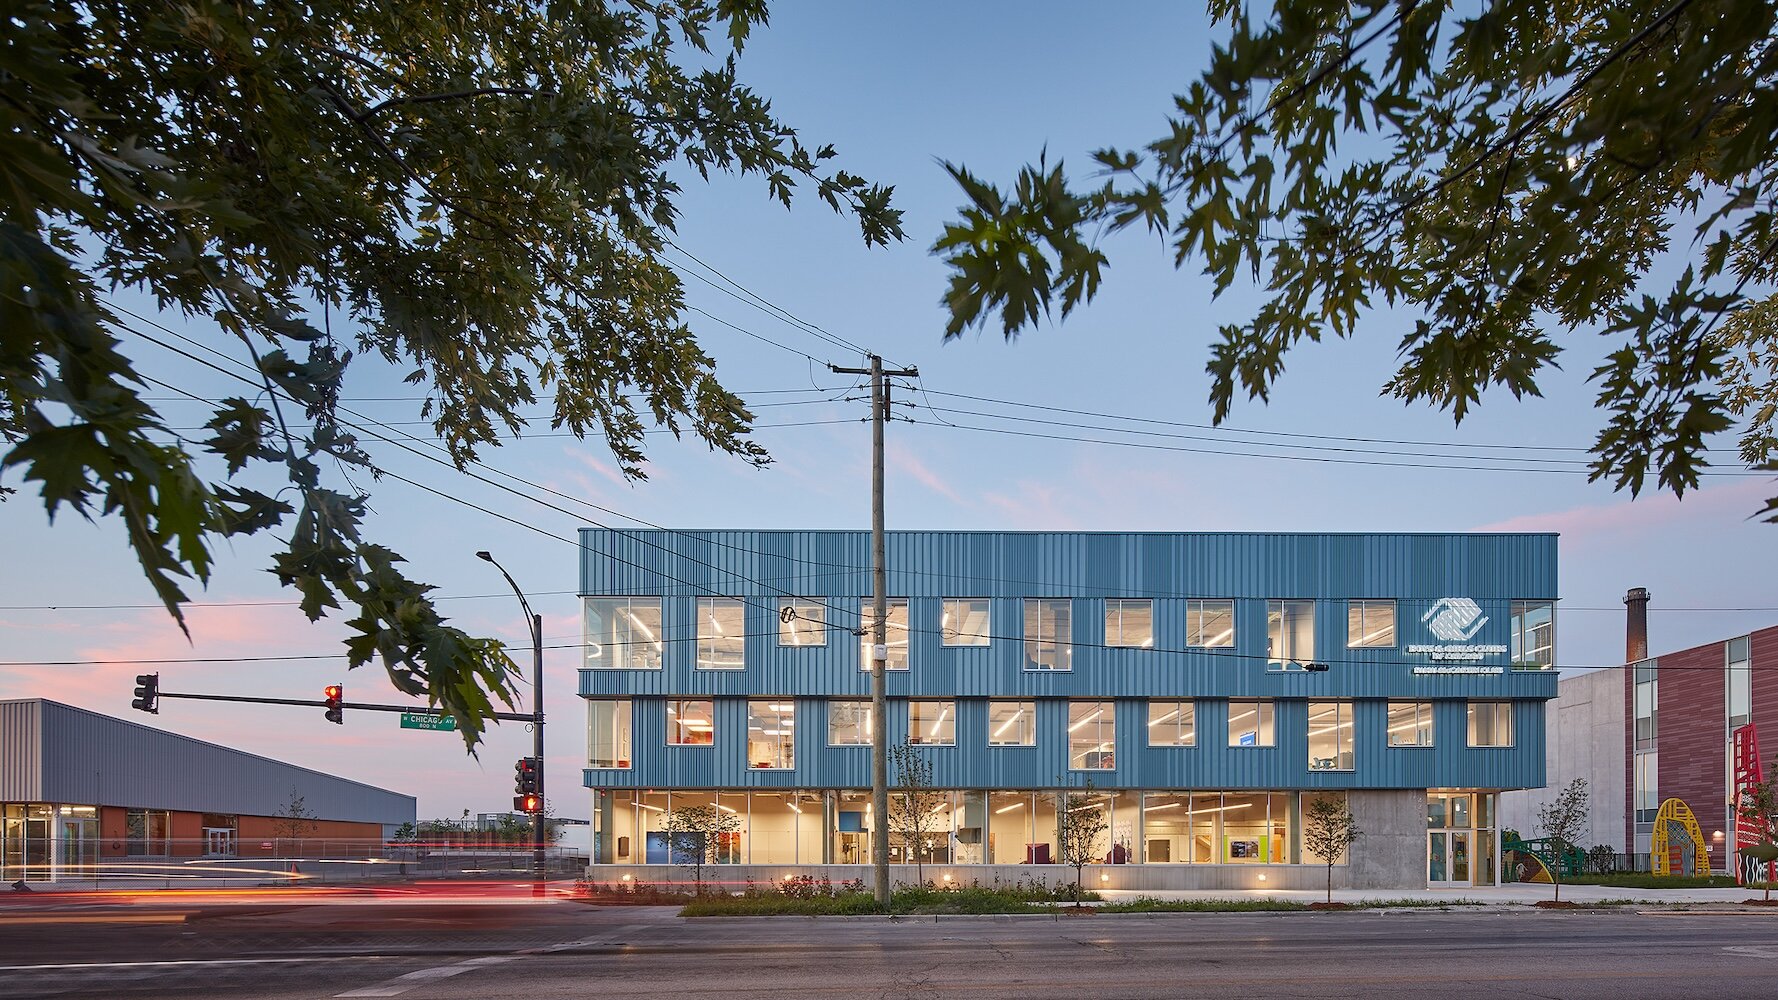 Chicago’s West Side Gains a New Community Anchor With Rusu-McCartin Boys & Girls Club by Latent Design